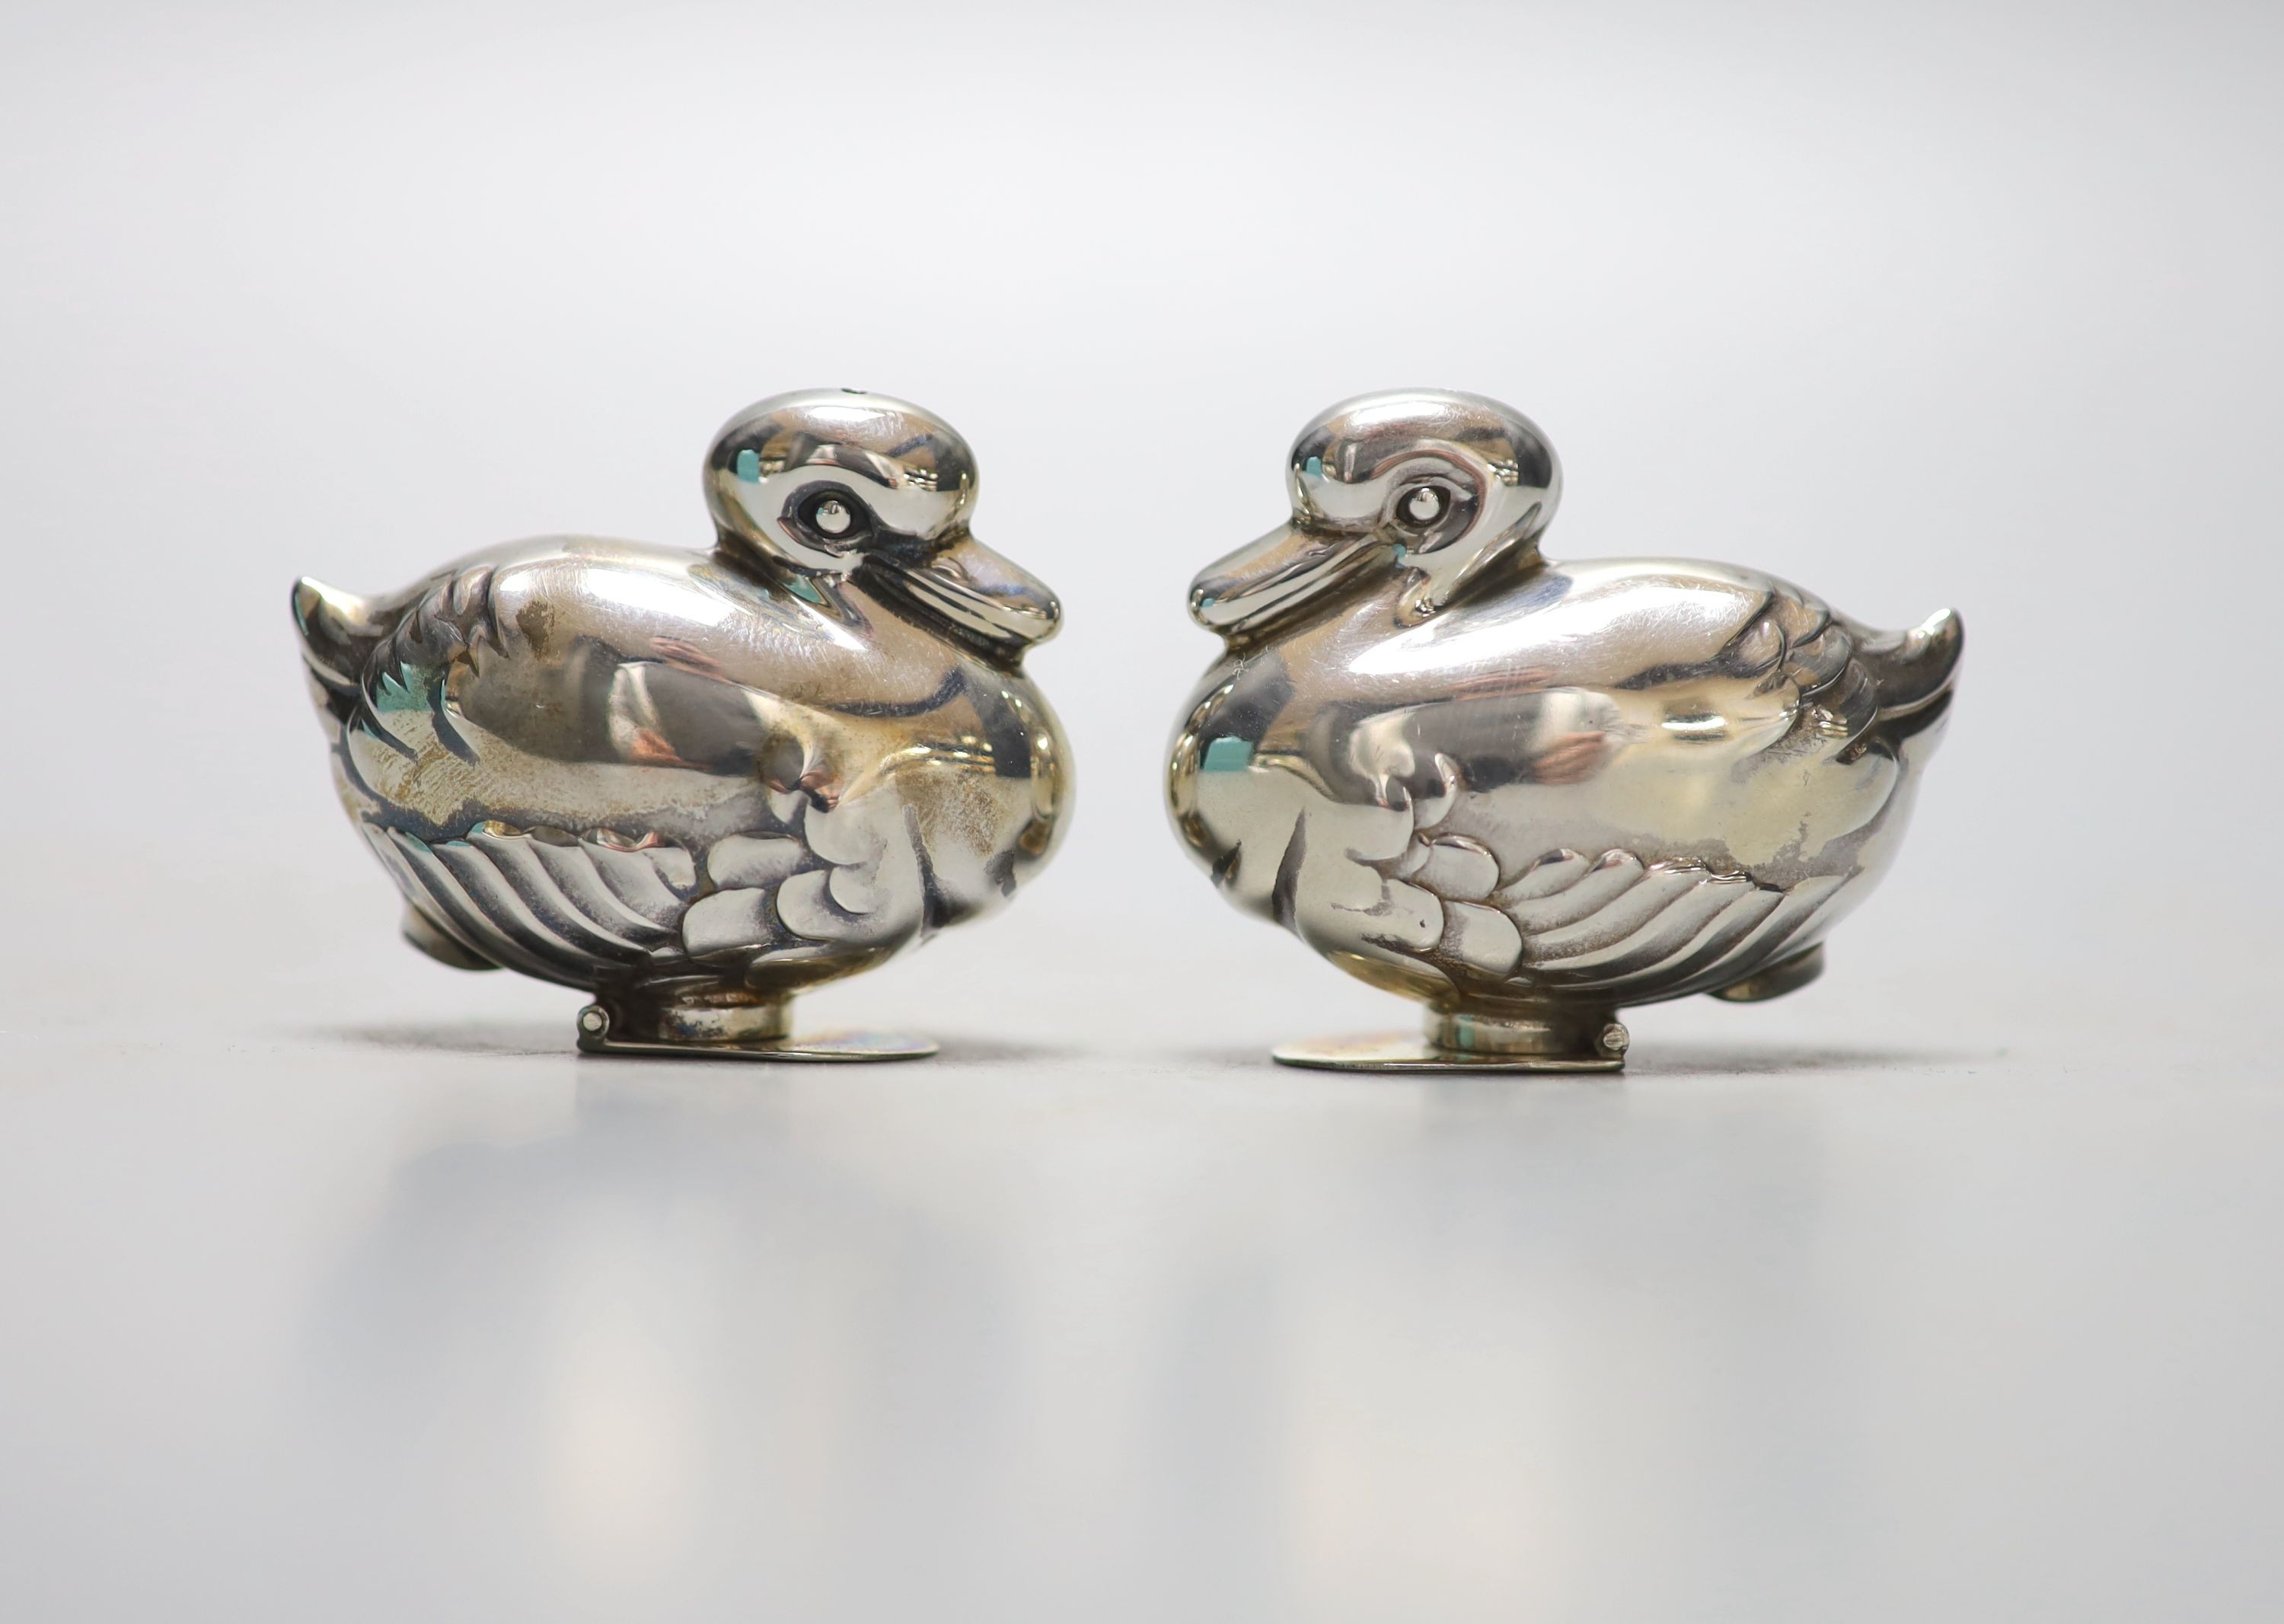 A modern pair of Tiffany & Co novelty silver condiments, modelled as a pair of ducks, height 4cm, with original box etc. import marks for London, 1990.